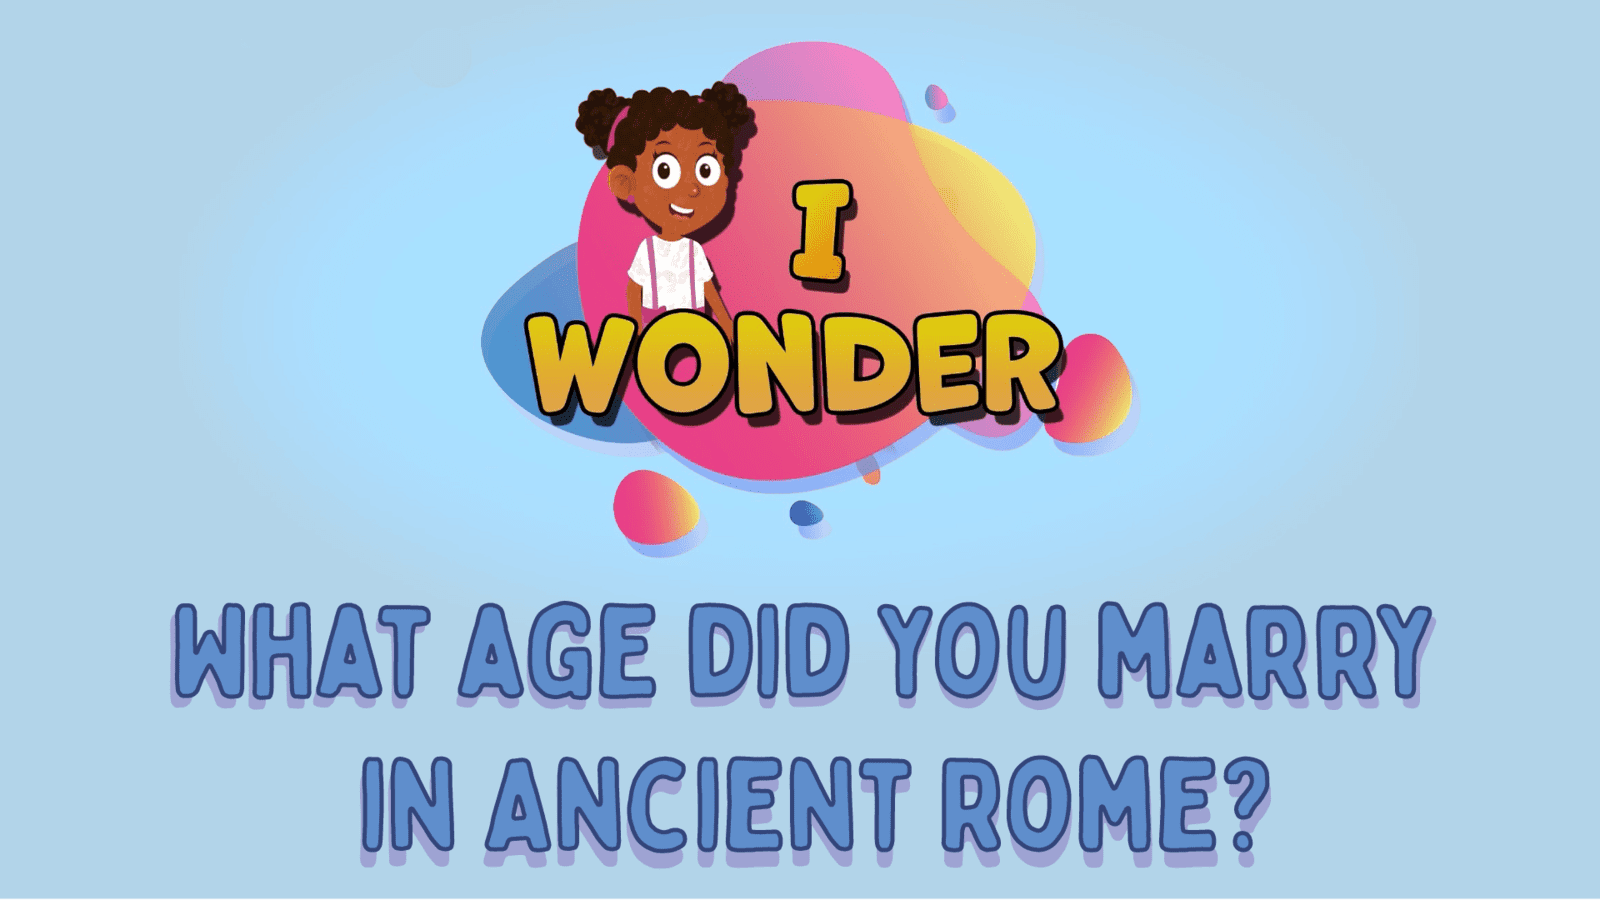 What Age Did You Marry In Ancient Rome?